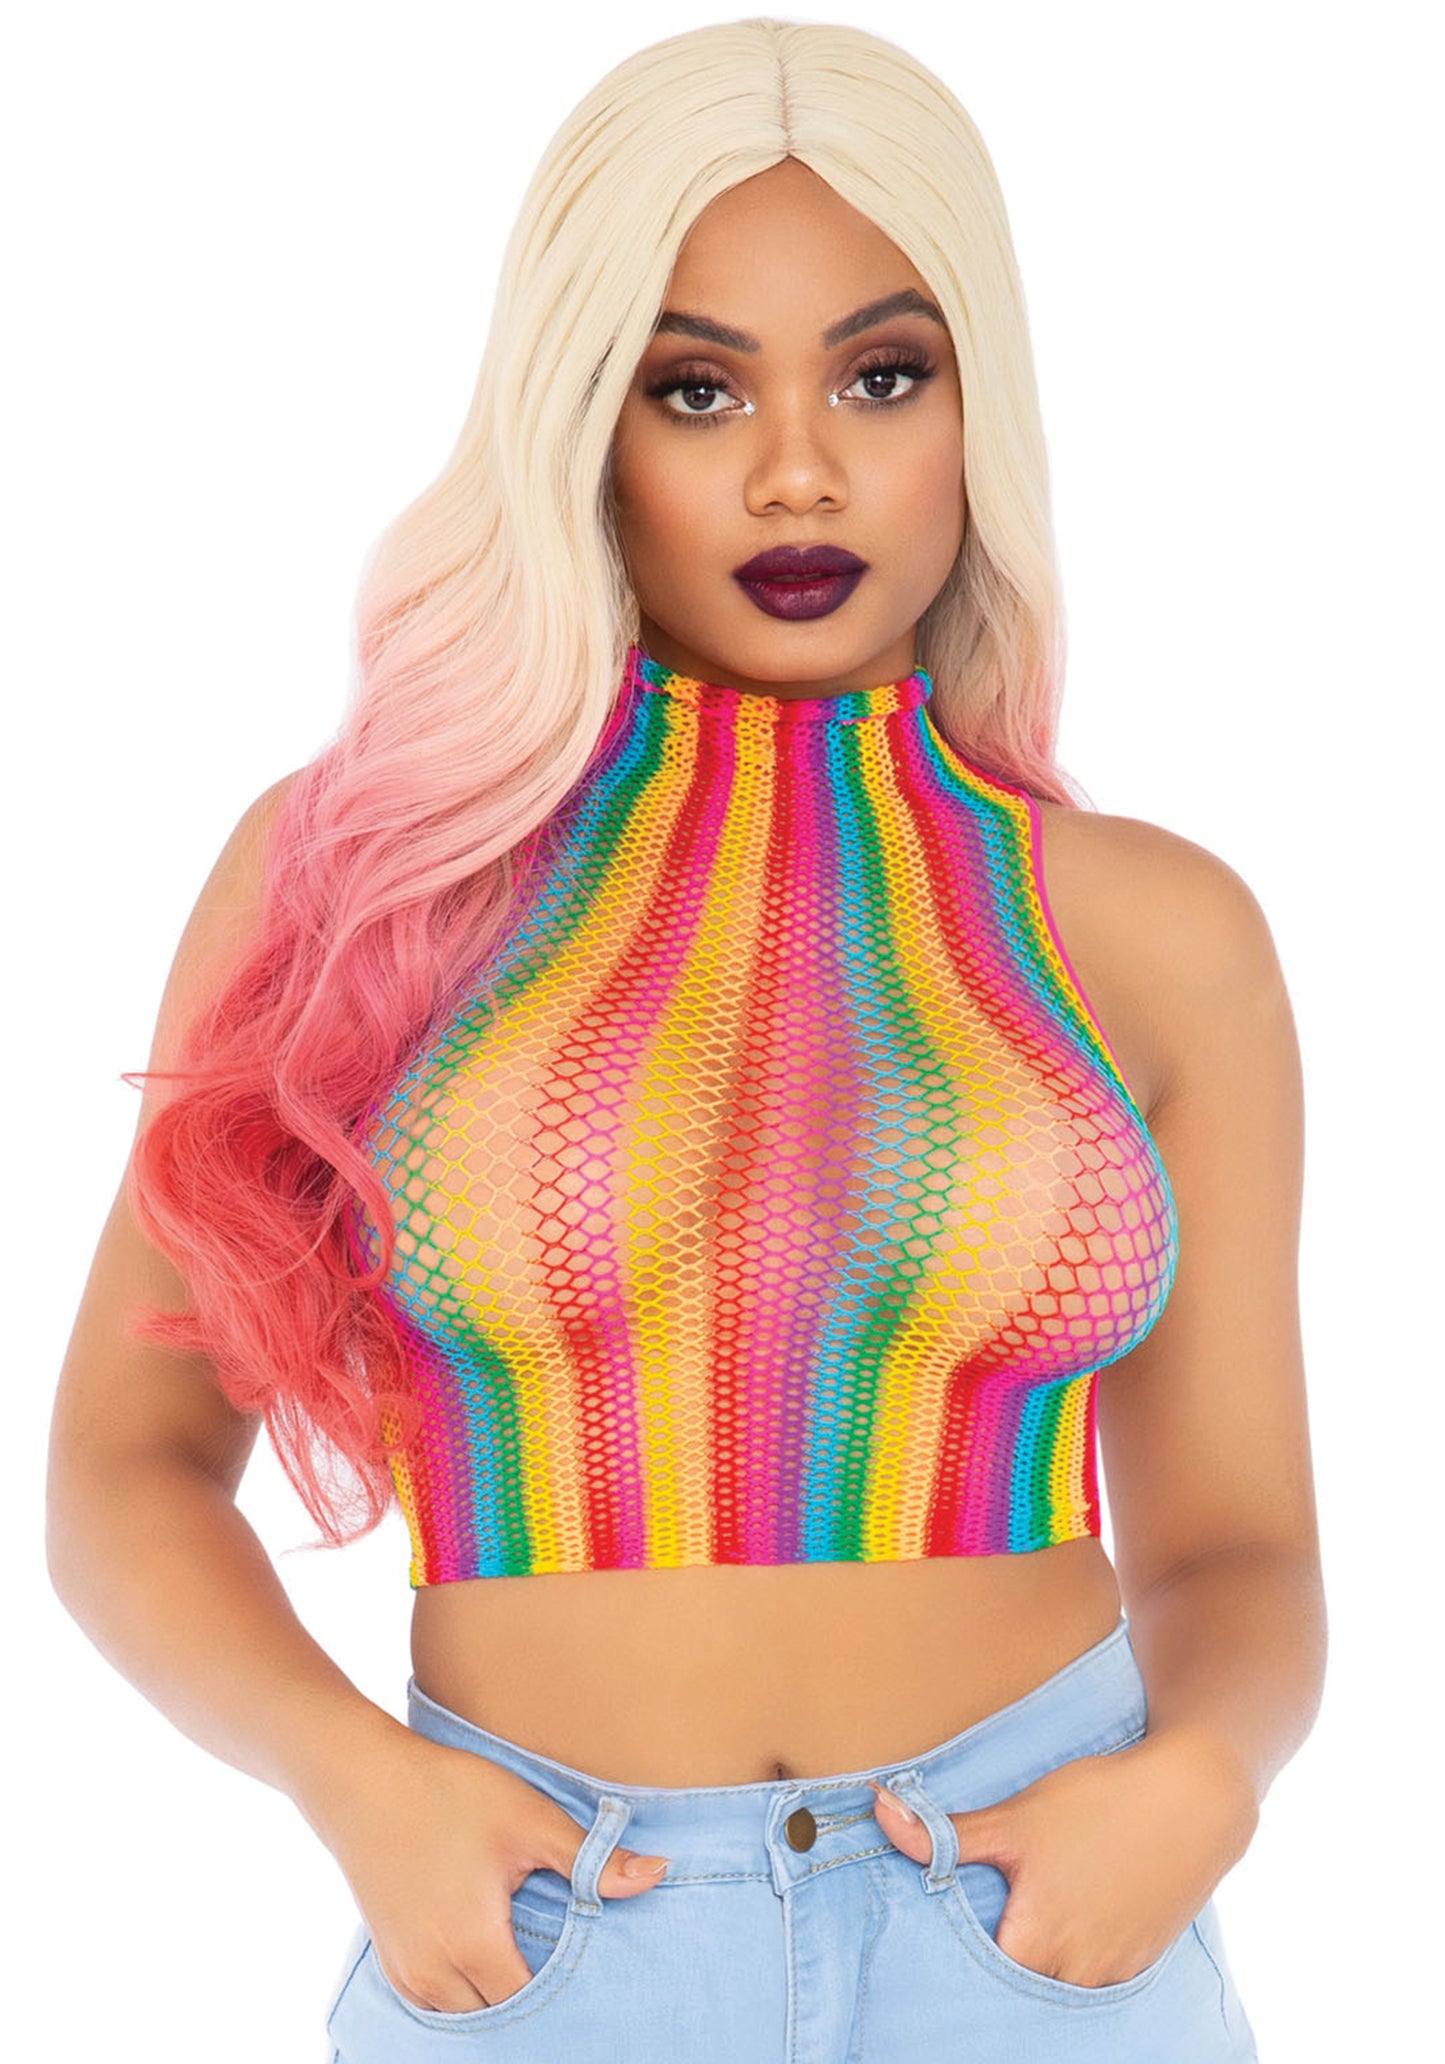 Leg Avenue 81610 Rainbow Net Crop Top - Multicoloured vertical striped high neck fishnet cropped top. Perfect for festivals.